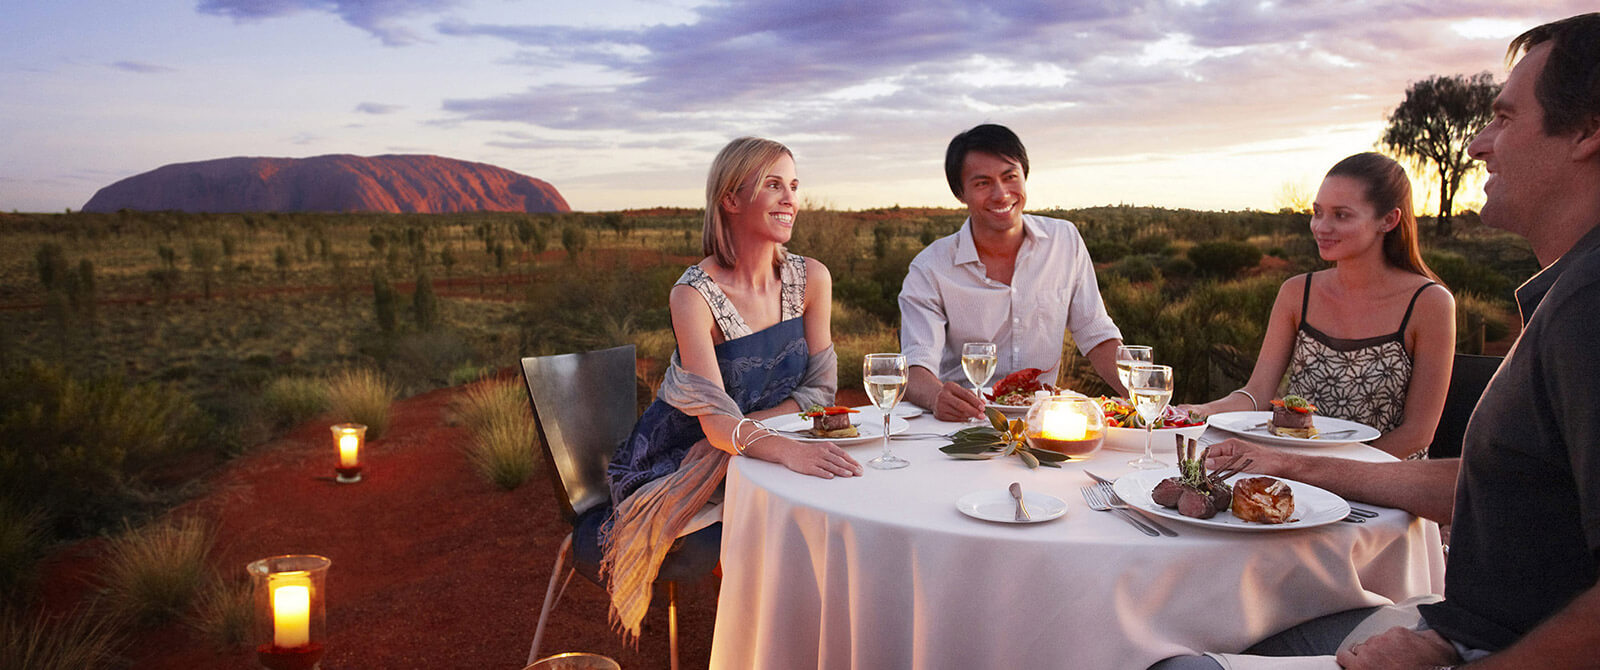 Sounds of Silence Dinner at Uluru Ayers Rock - Book Your Australia Vacation - Australia Travel Agency